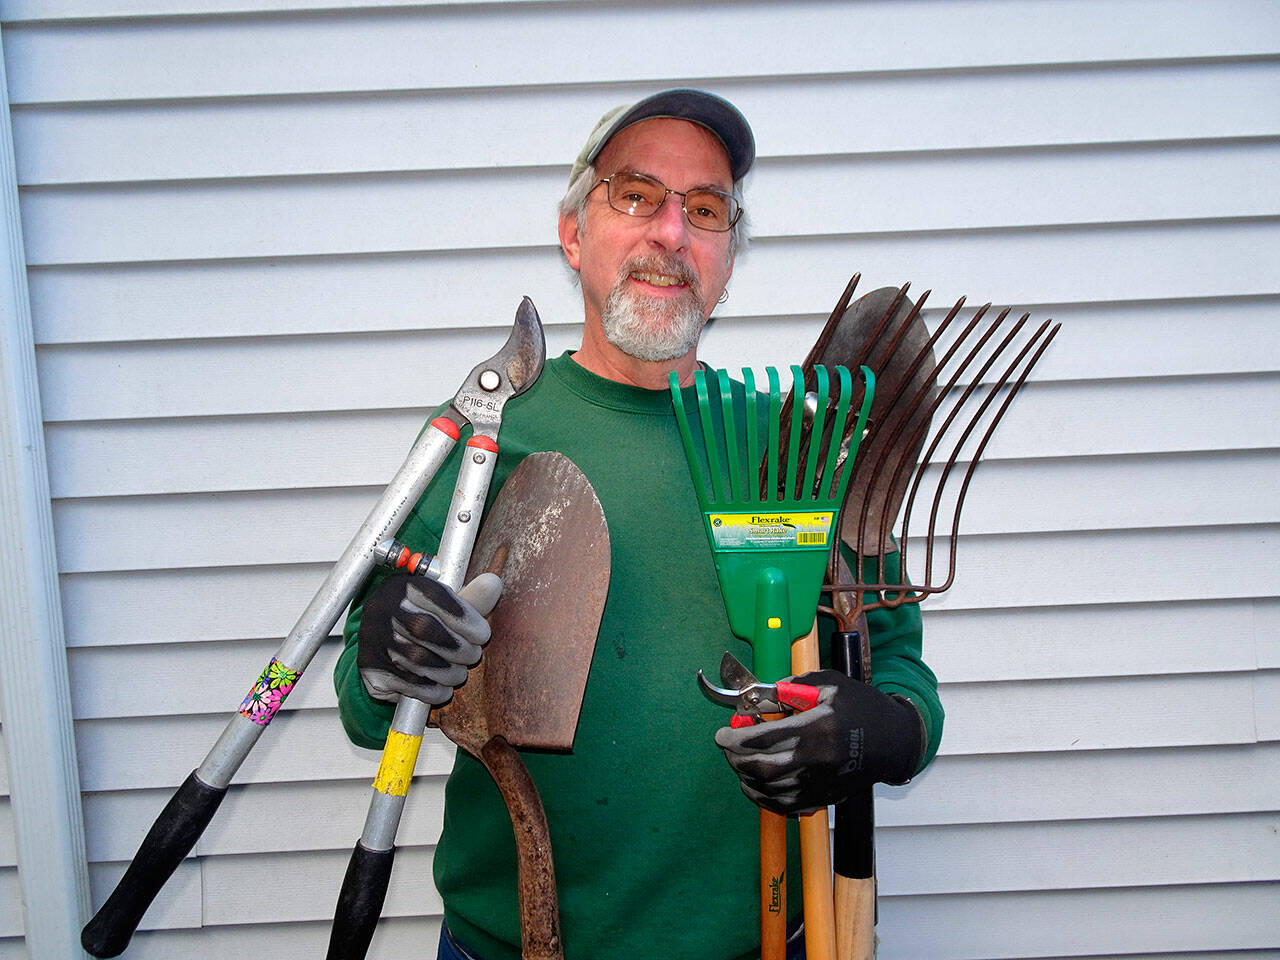 Learn about purchasing and caring for gardening tools from Master Gardener and active Plant Amnesty volunteer Keith Dekker via a Zoom lecture set for noon-1 p.m. Thursday, Dec. 9. Photo courtesy of Keith Dekker